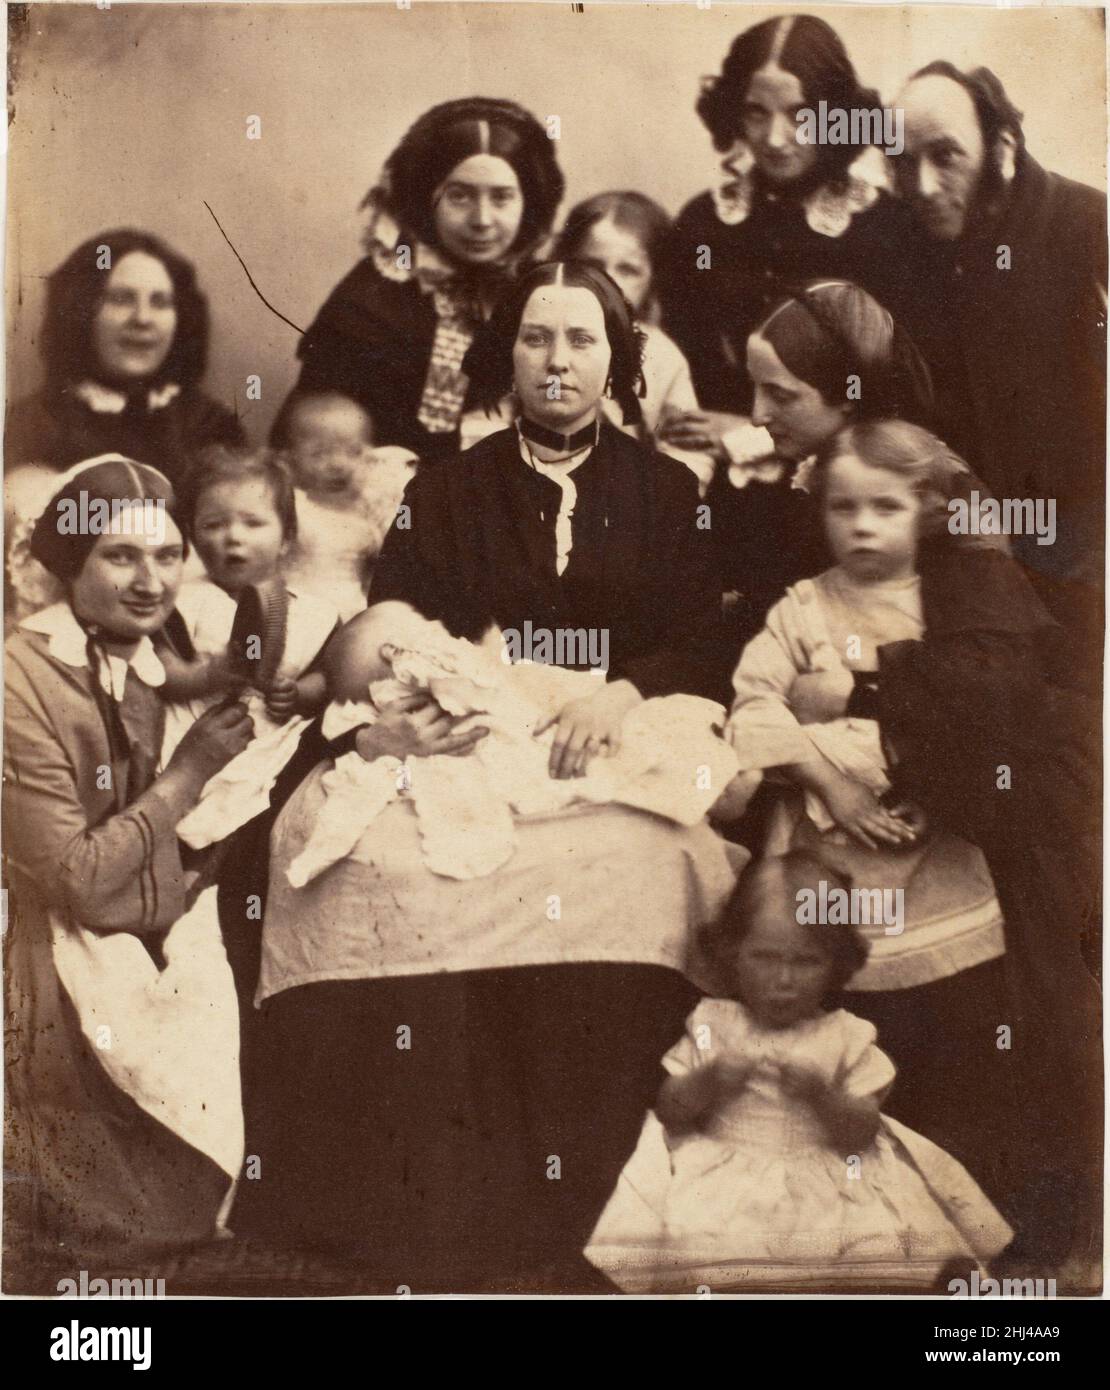 Mr. and Mrs. R. B. Tennent, Mrs. E. H. Yates, Mrs. Brandram, their Children and Three Nurses 1850s Unknown In 1853 Edmund Hodgson Yates (1831-1894), a pugnacious society journalist and satirical playwright, married Louisa Wilkinson, and the couple had four sons in as many years. Edmund was a son of traveling actors, Louisa the daughter of a Pall Mall swordmaker, but the leading lights of literary, journalistic, dramatic, and bohemian London all rubbed elbows in the Yateses' lively and informal household. Their friends included the young Reverend Charles Lutwidge Dodgson, whose humorous writing Stock Photo